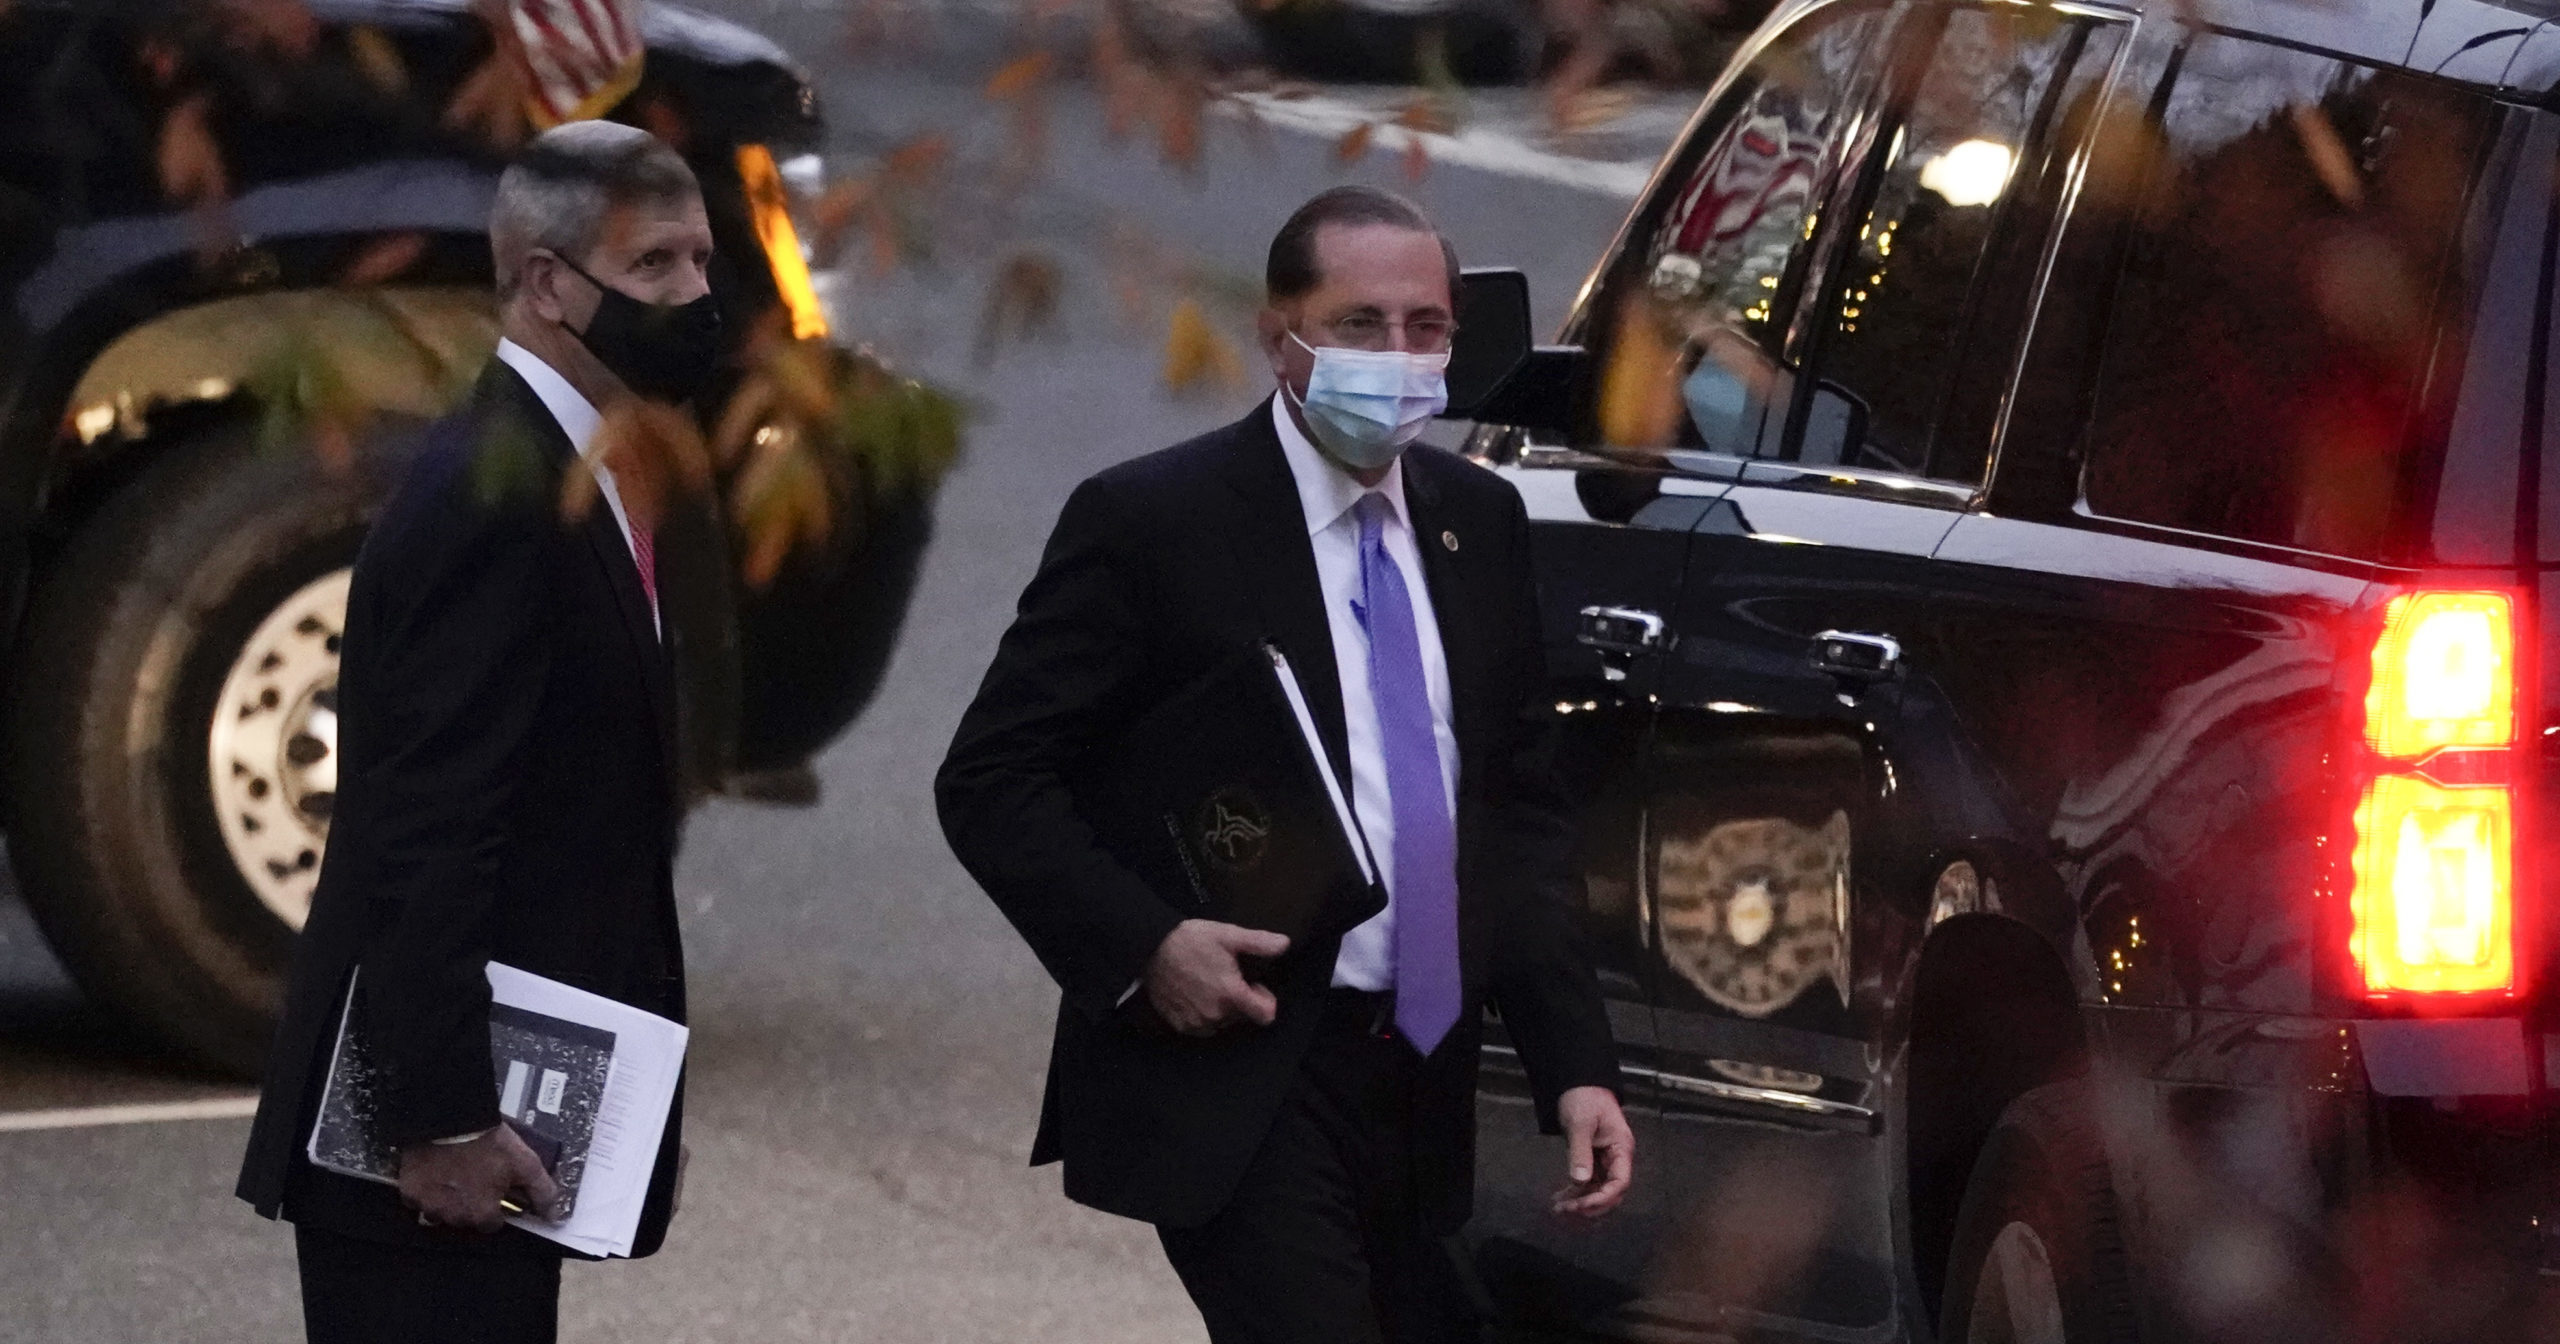 Health and Human Services Secretary Alex Azar leaves the White House on Dec. 1, 2020, in Washington, D.C.